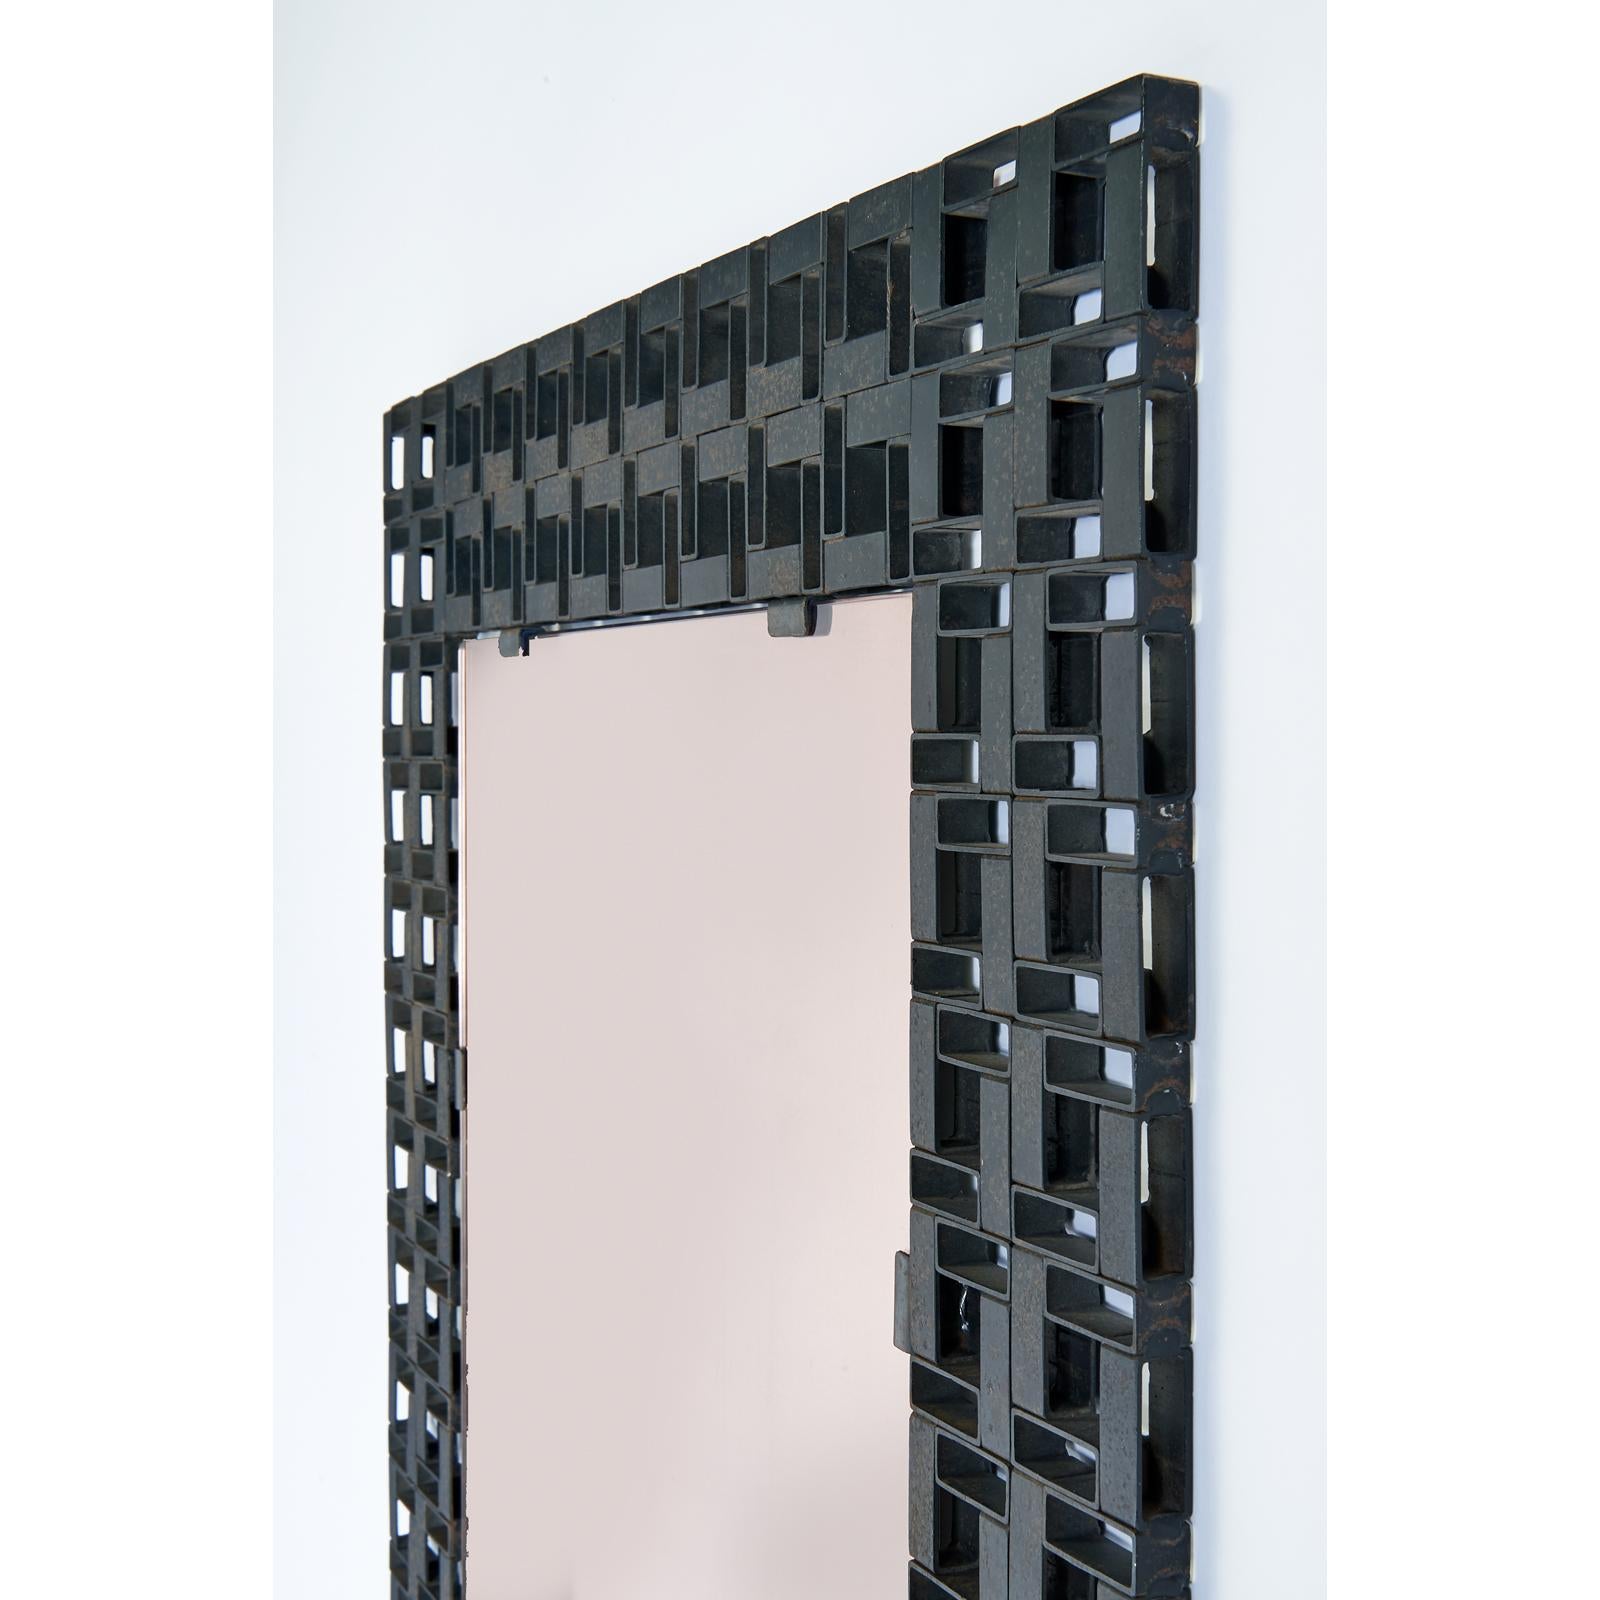 Italy, 1970s
Worked iron mirror with geometric interwoven links. Tinted mirror
Dimensions: 39 H x 26 W.